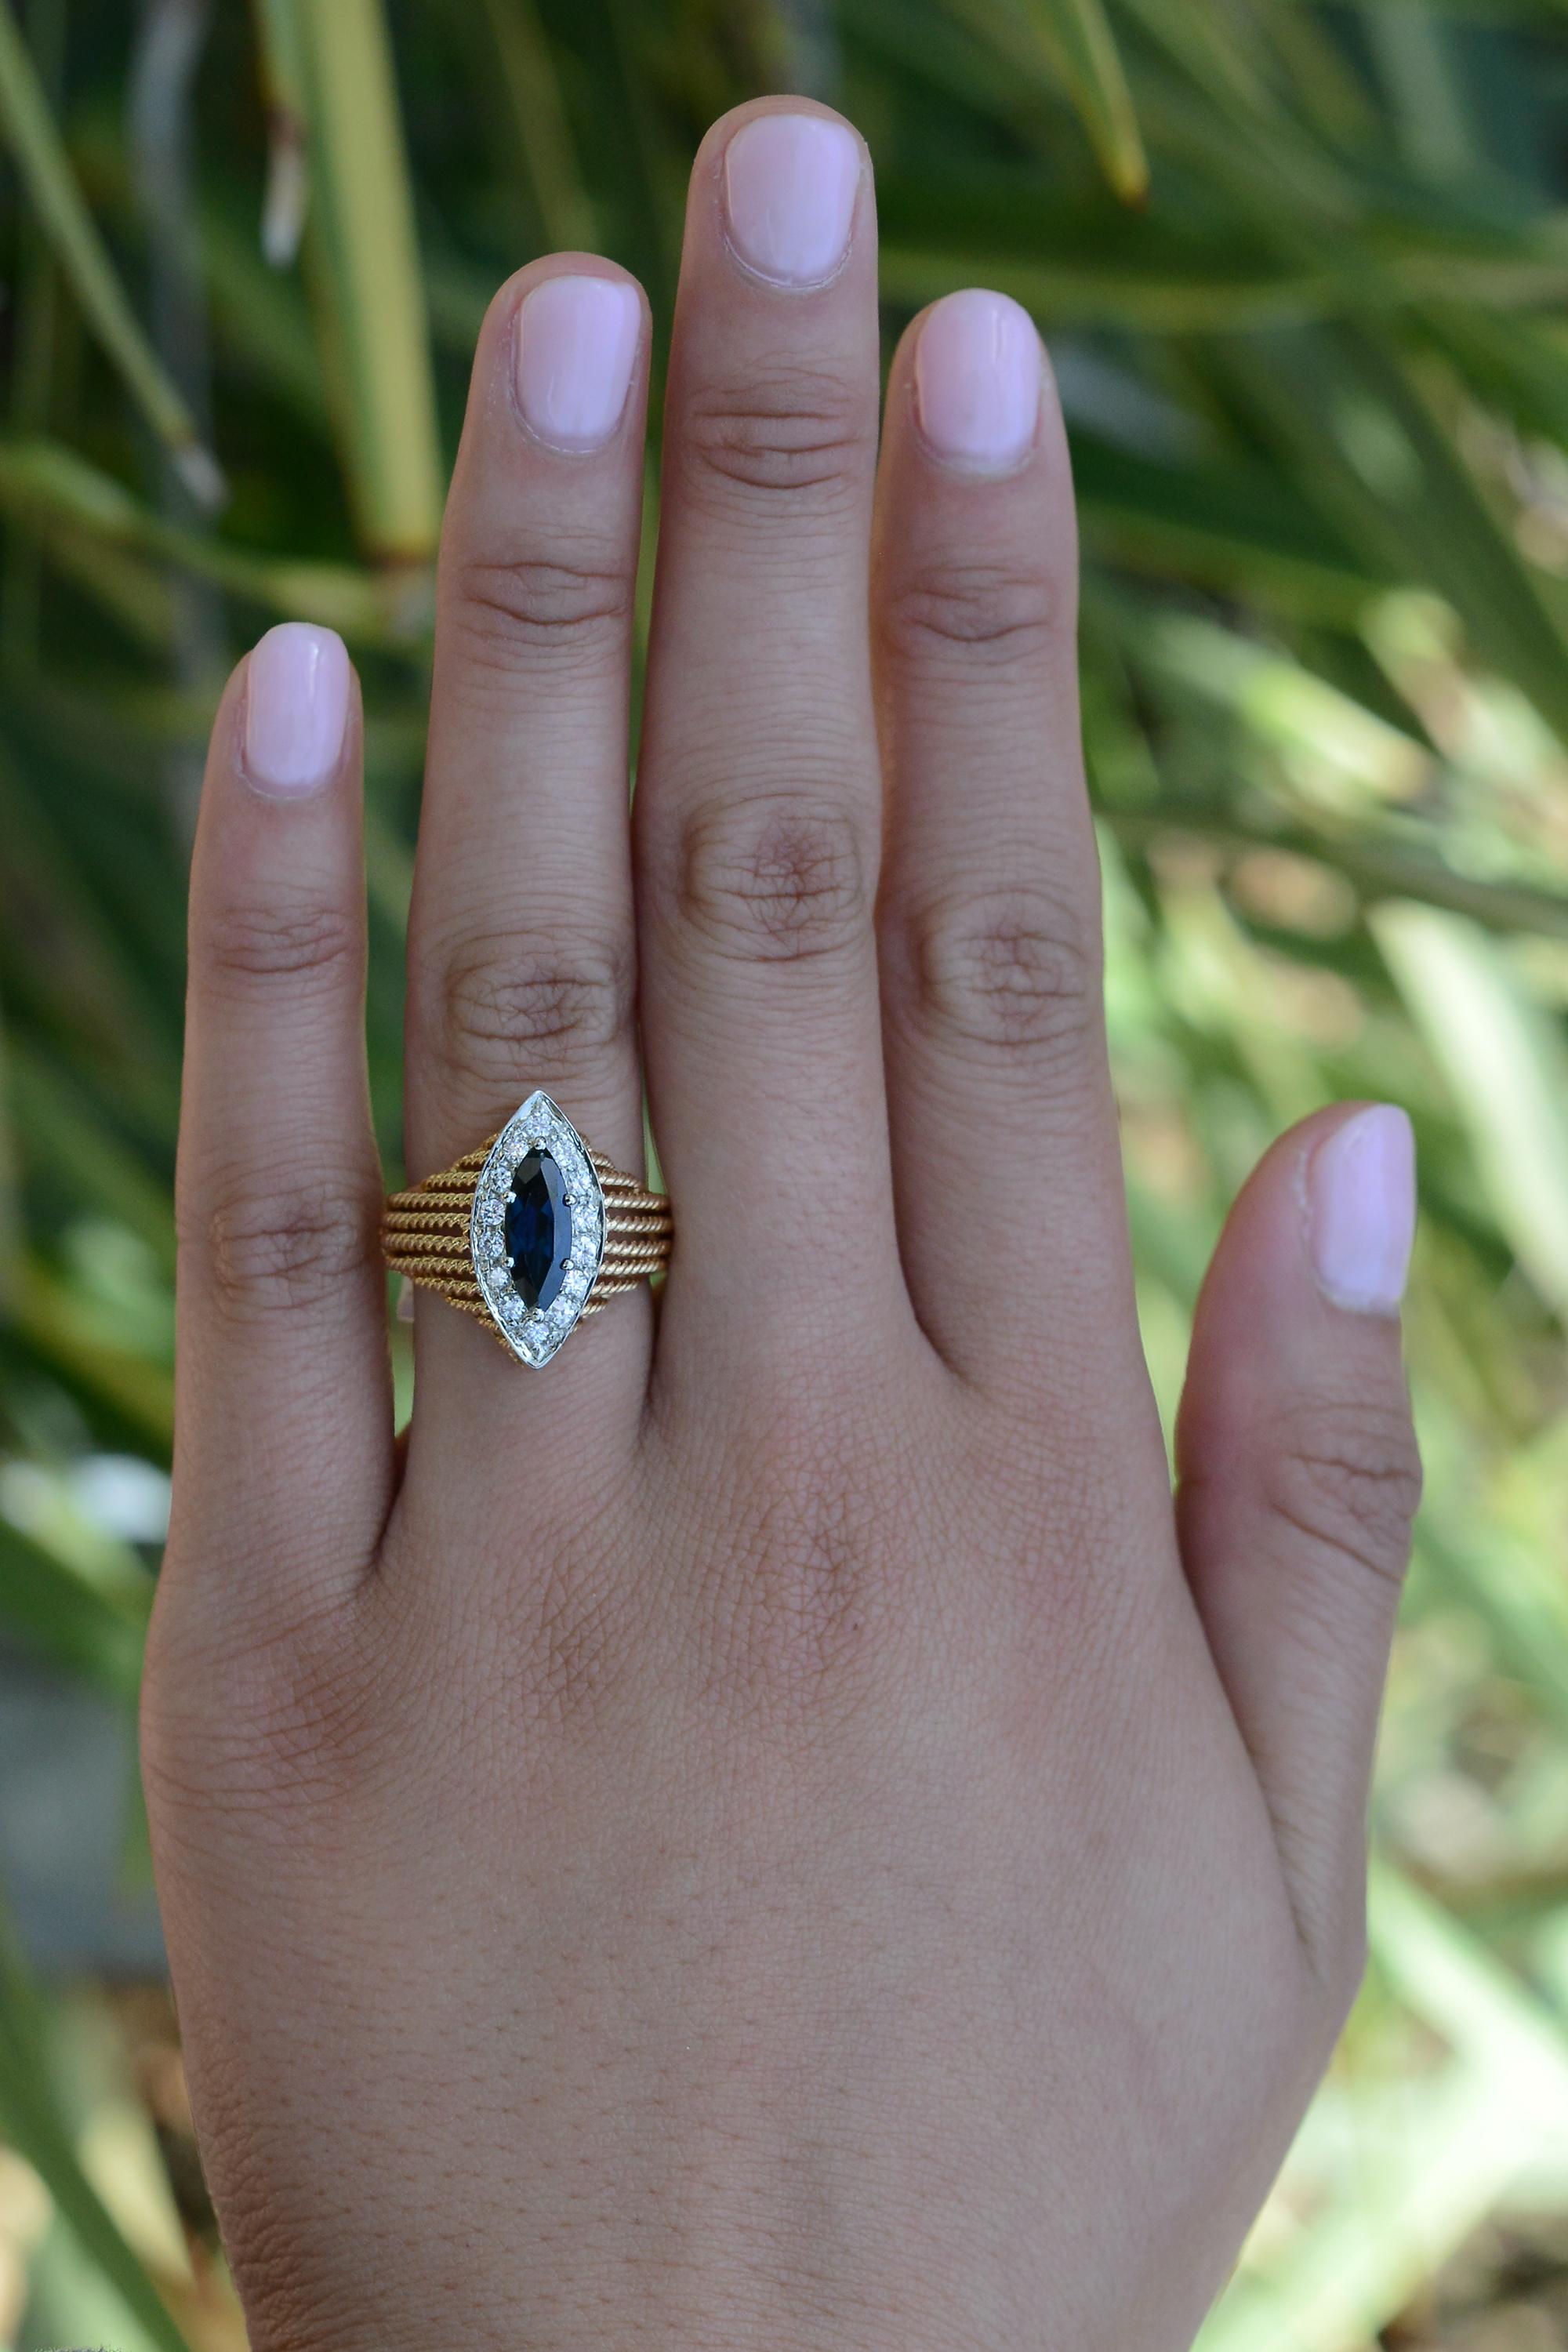 Make a sophisticated statement with this affordable vintage Mid Century cocktail engagement ring. The enchanting, elongated design features a pristine 1.17 carat natural sapphire, framed by an impressive layout of diamonds, ensuring fantastic